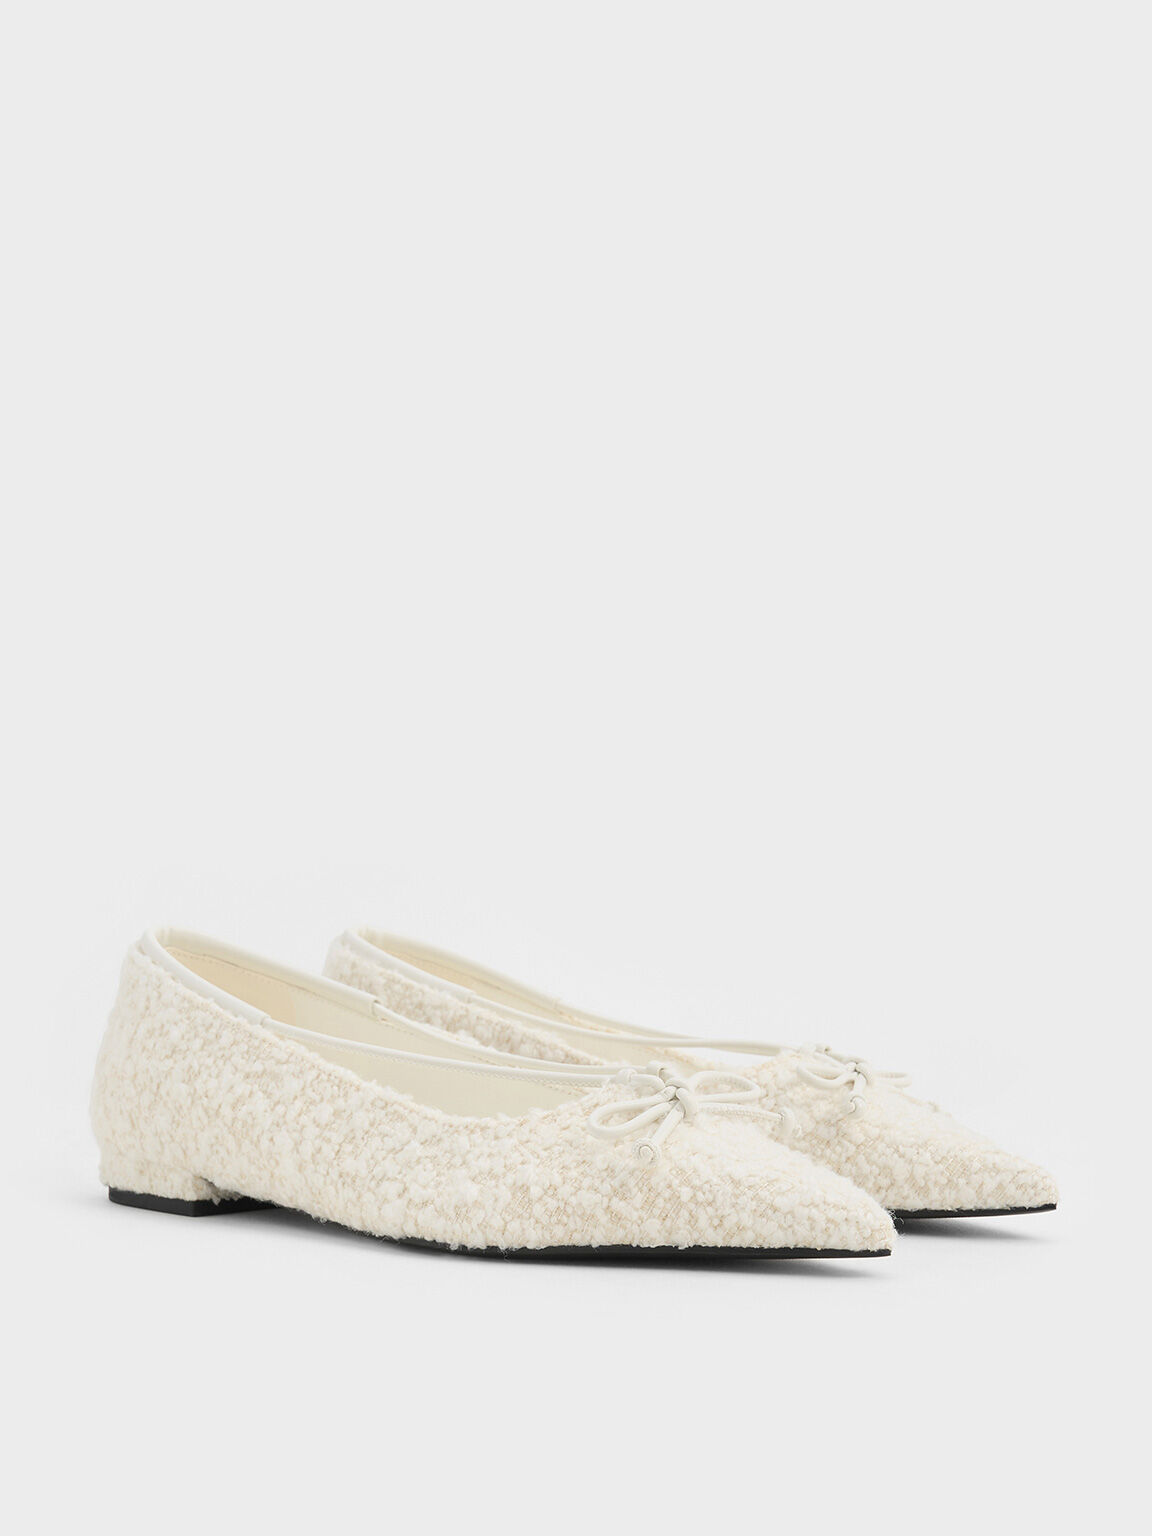 Textured Bow Pointed-Toe Ballet Flats, White, hi-res